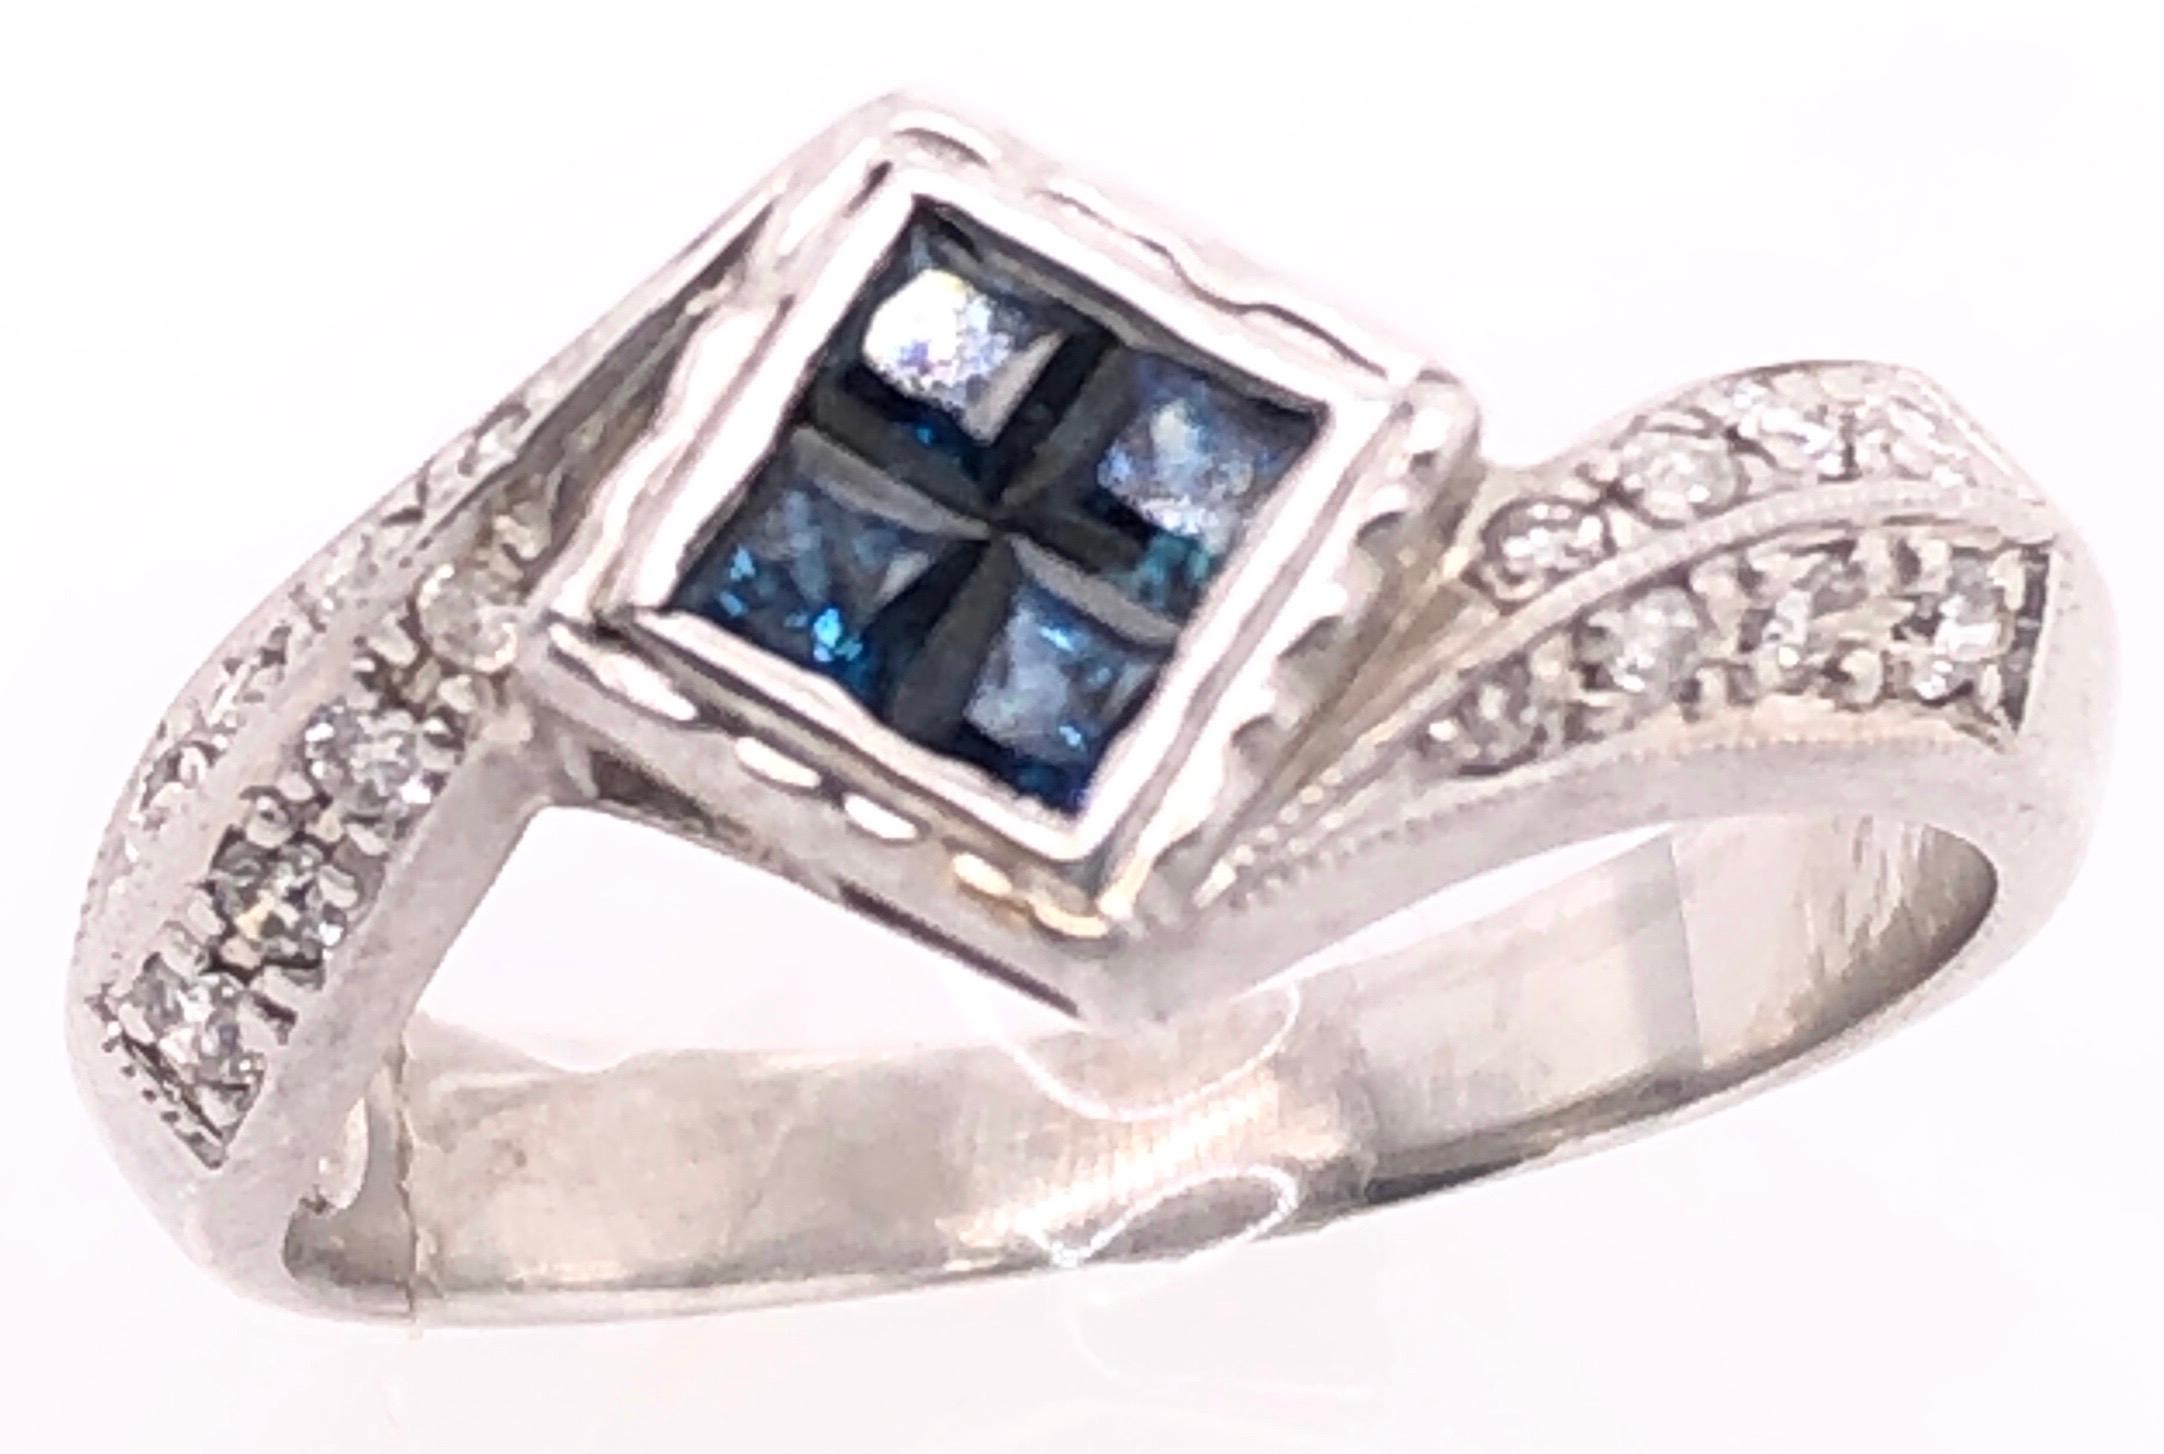 14 Karat White Gold Contemporary Sapphire Ring with Round Diamonds 
0.16 TDW .
Size 7.5
4.46 grams  total weight.